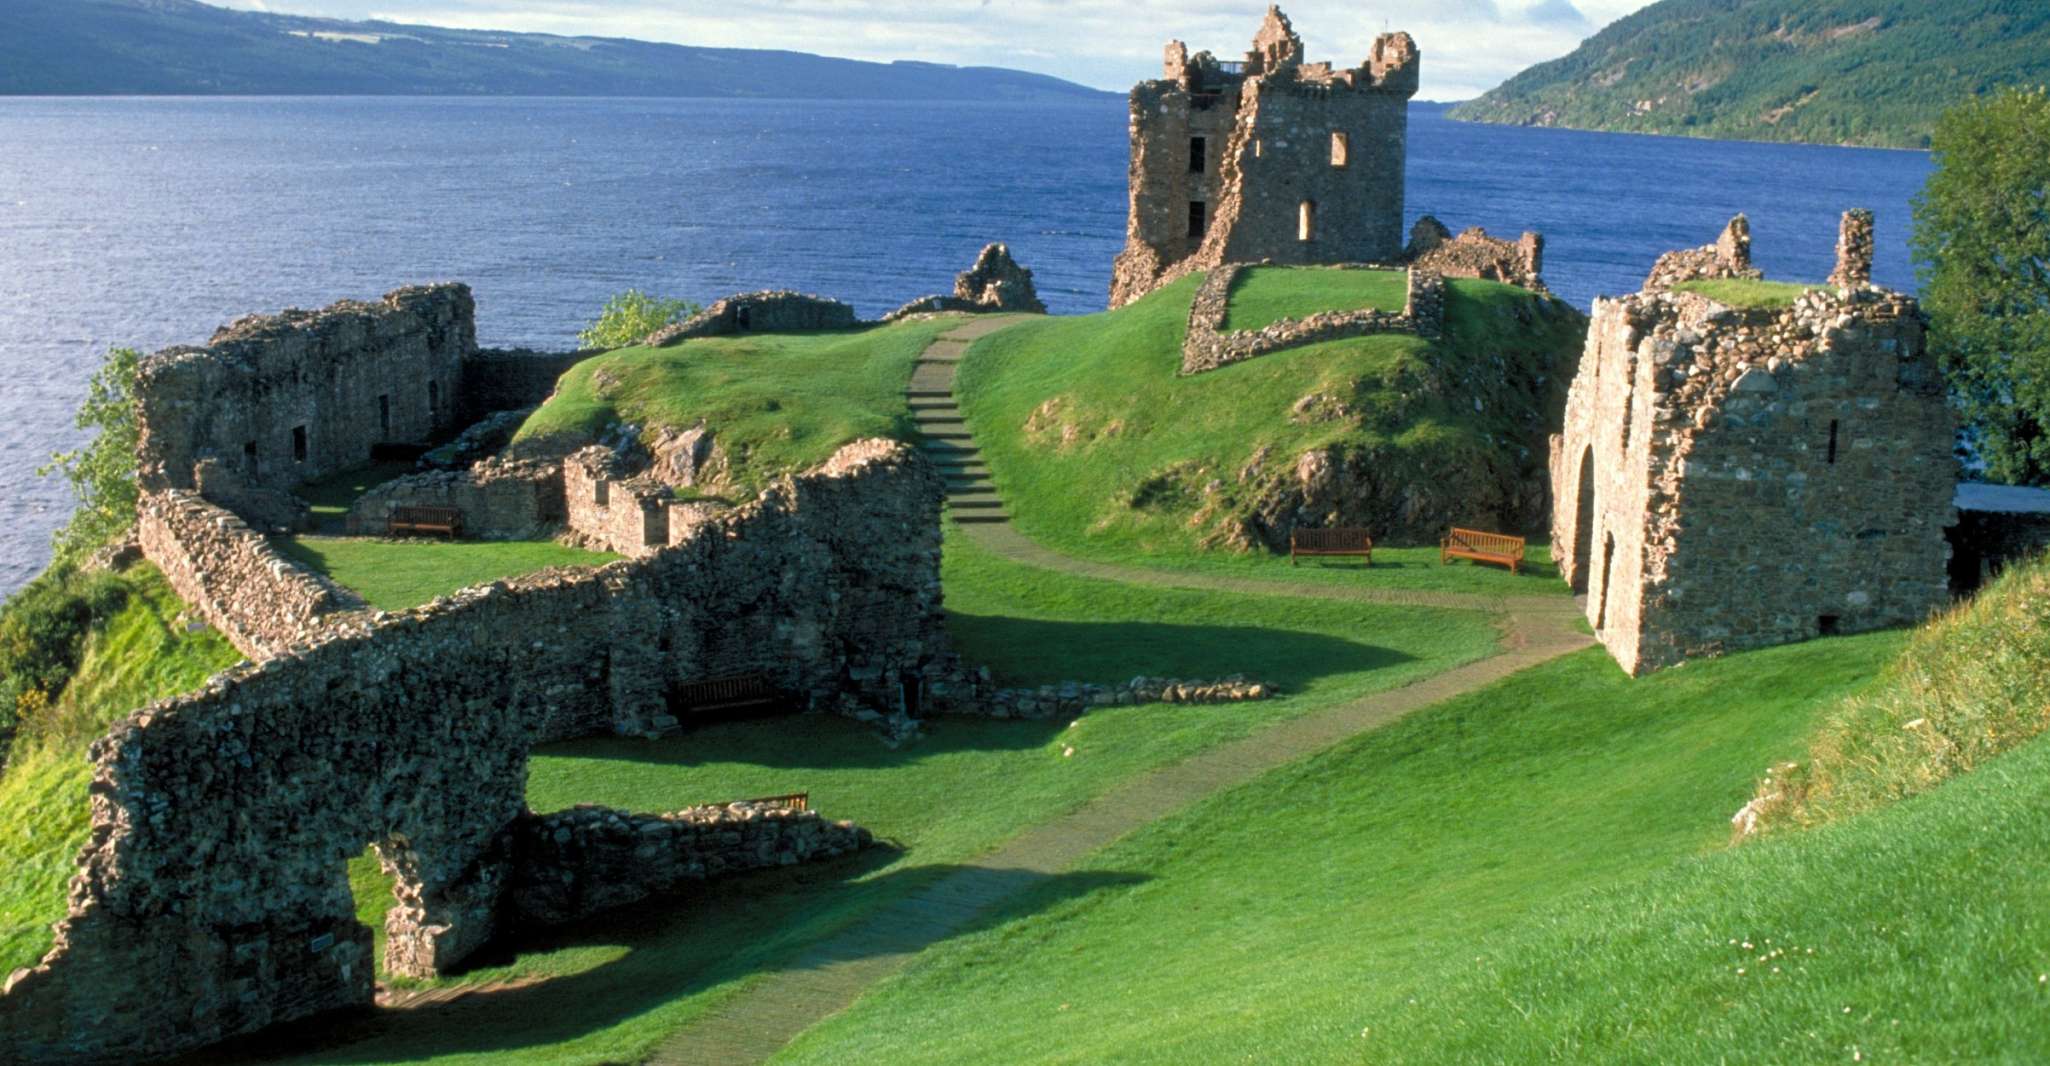 Inverness, Loch Ness Cruise, Castle, and Outlander Tour - Housity